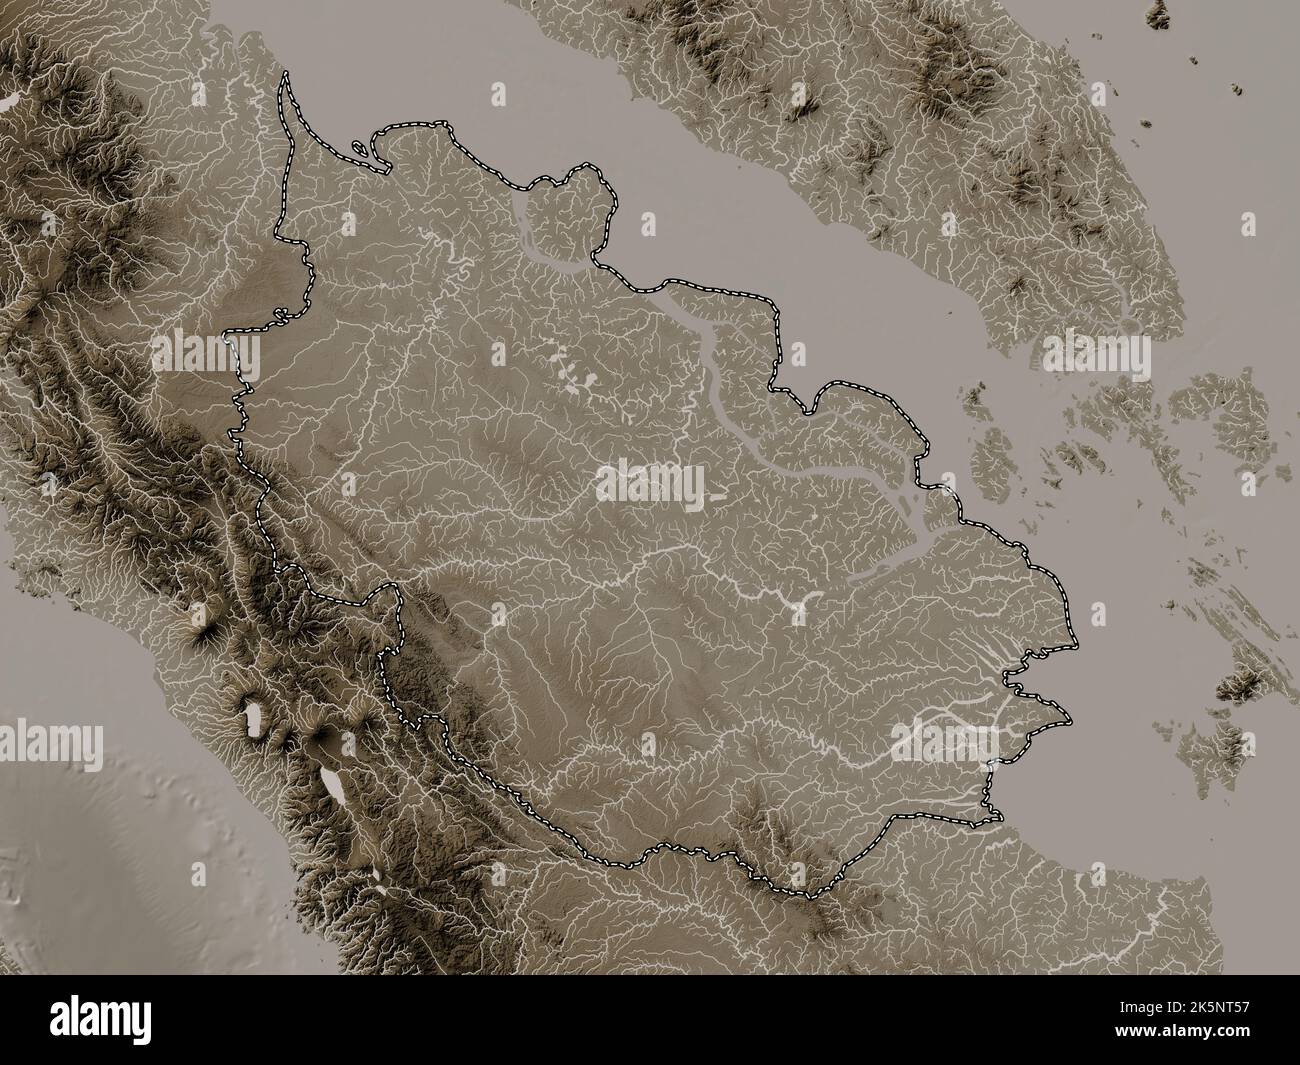 Riau, province of Indonesia. Elevation map colored in sepia tones with lakes and rivers Stock Photo